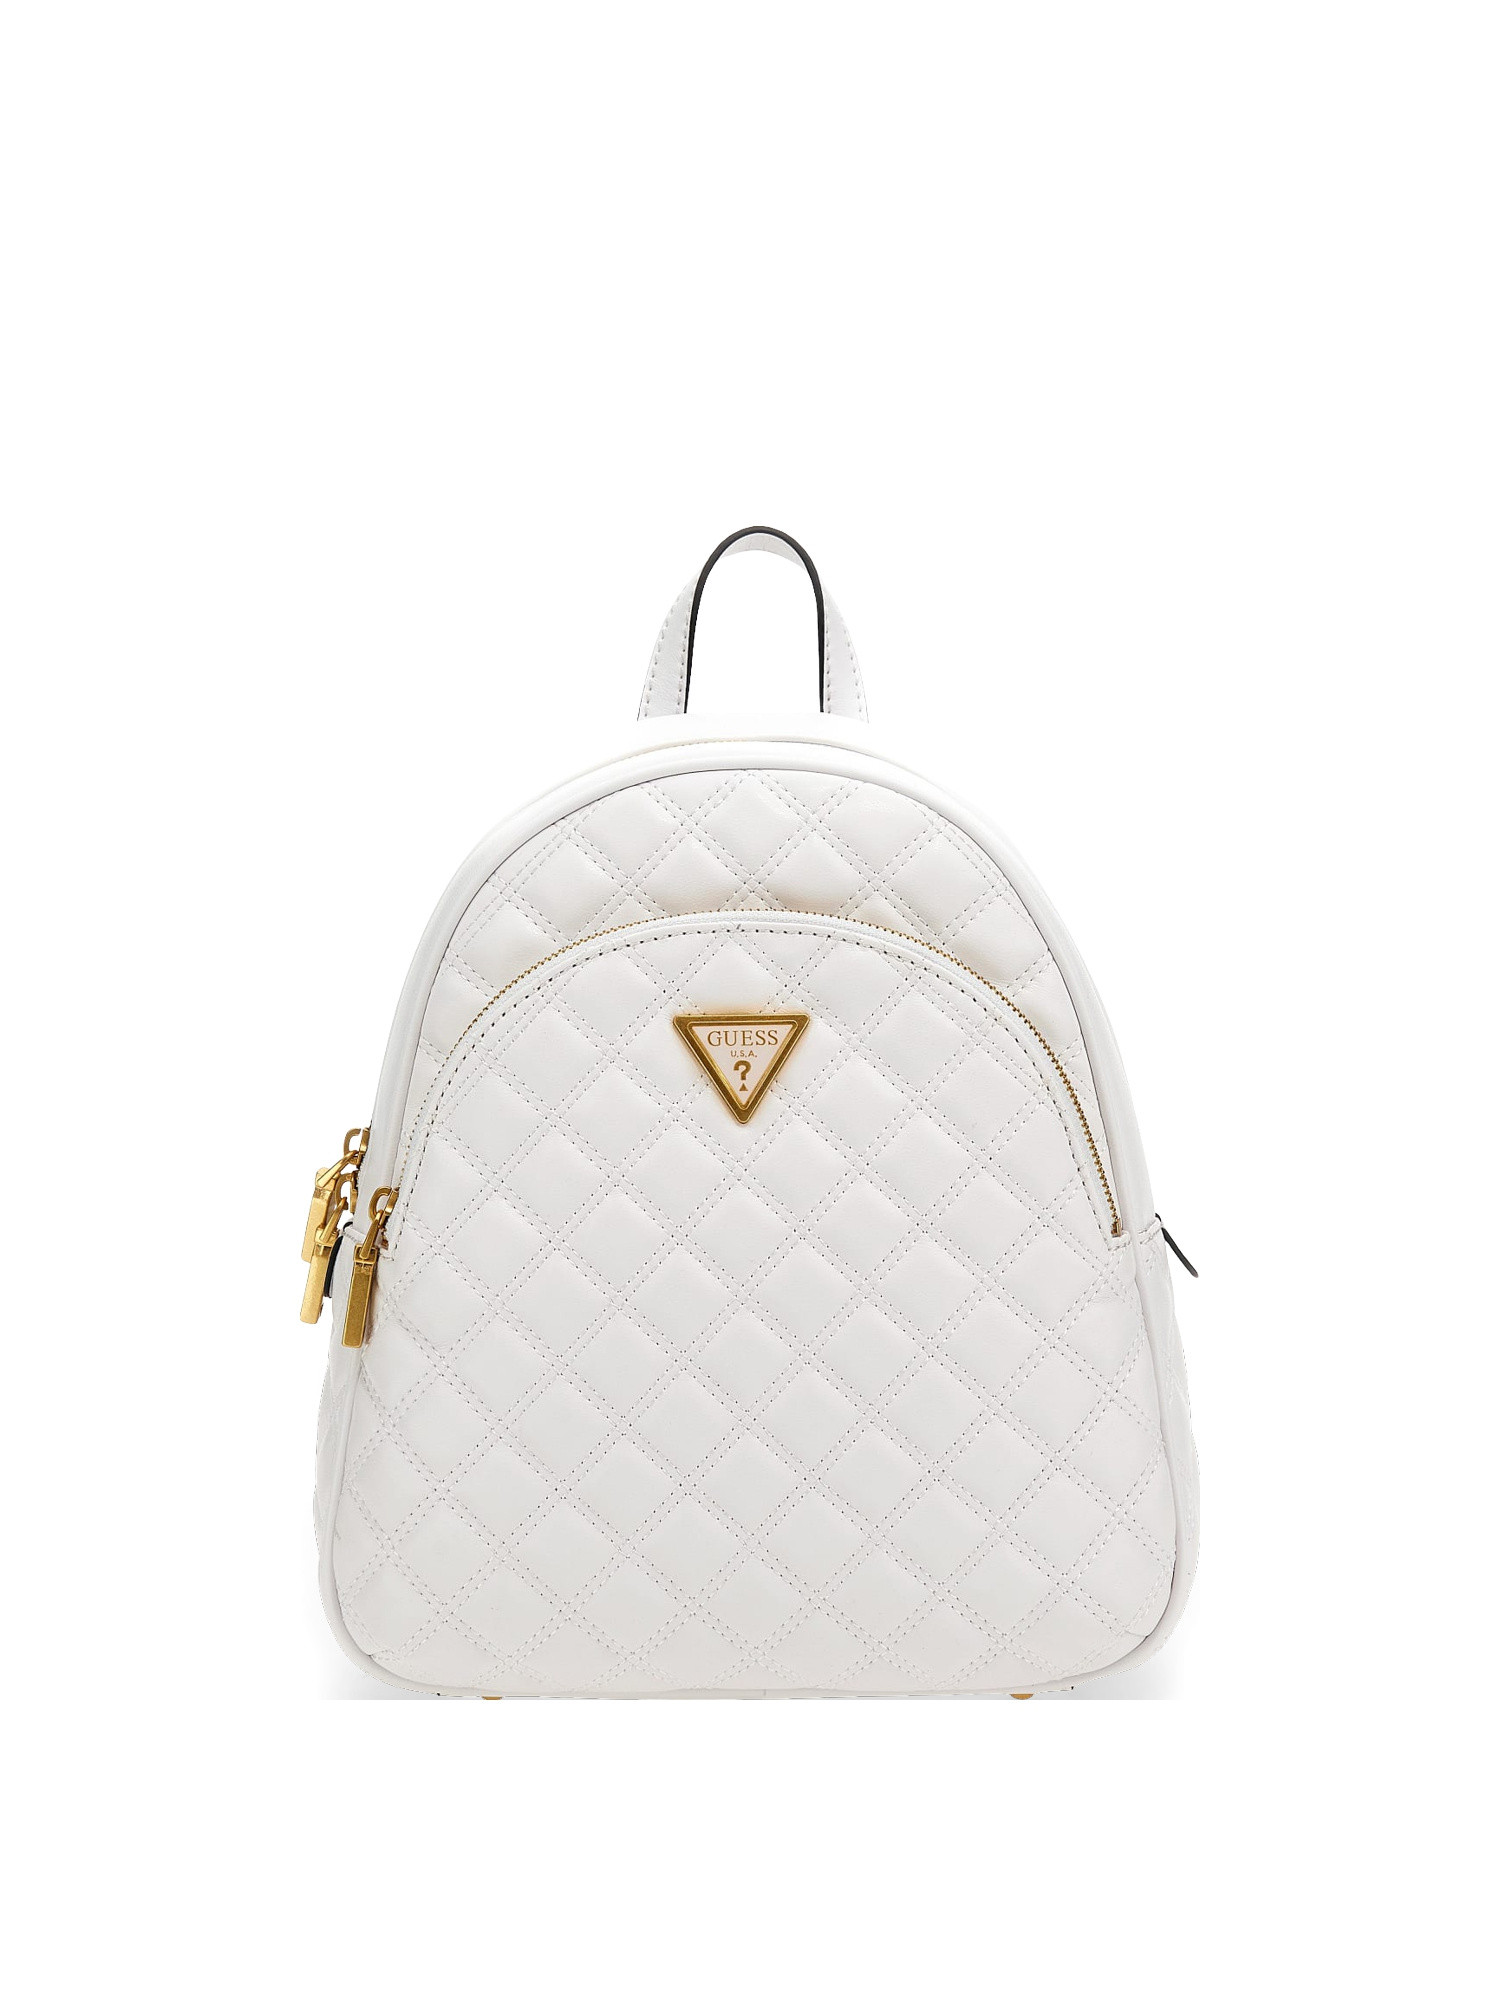 Guess - Giully quilted backpack, White, large image number 0